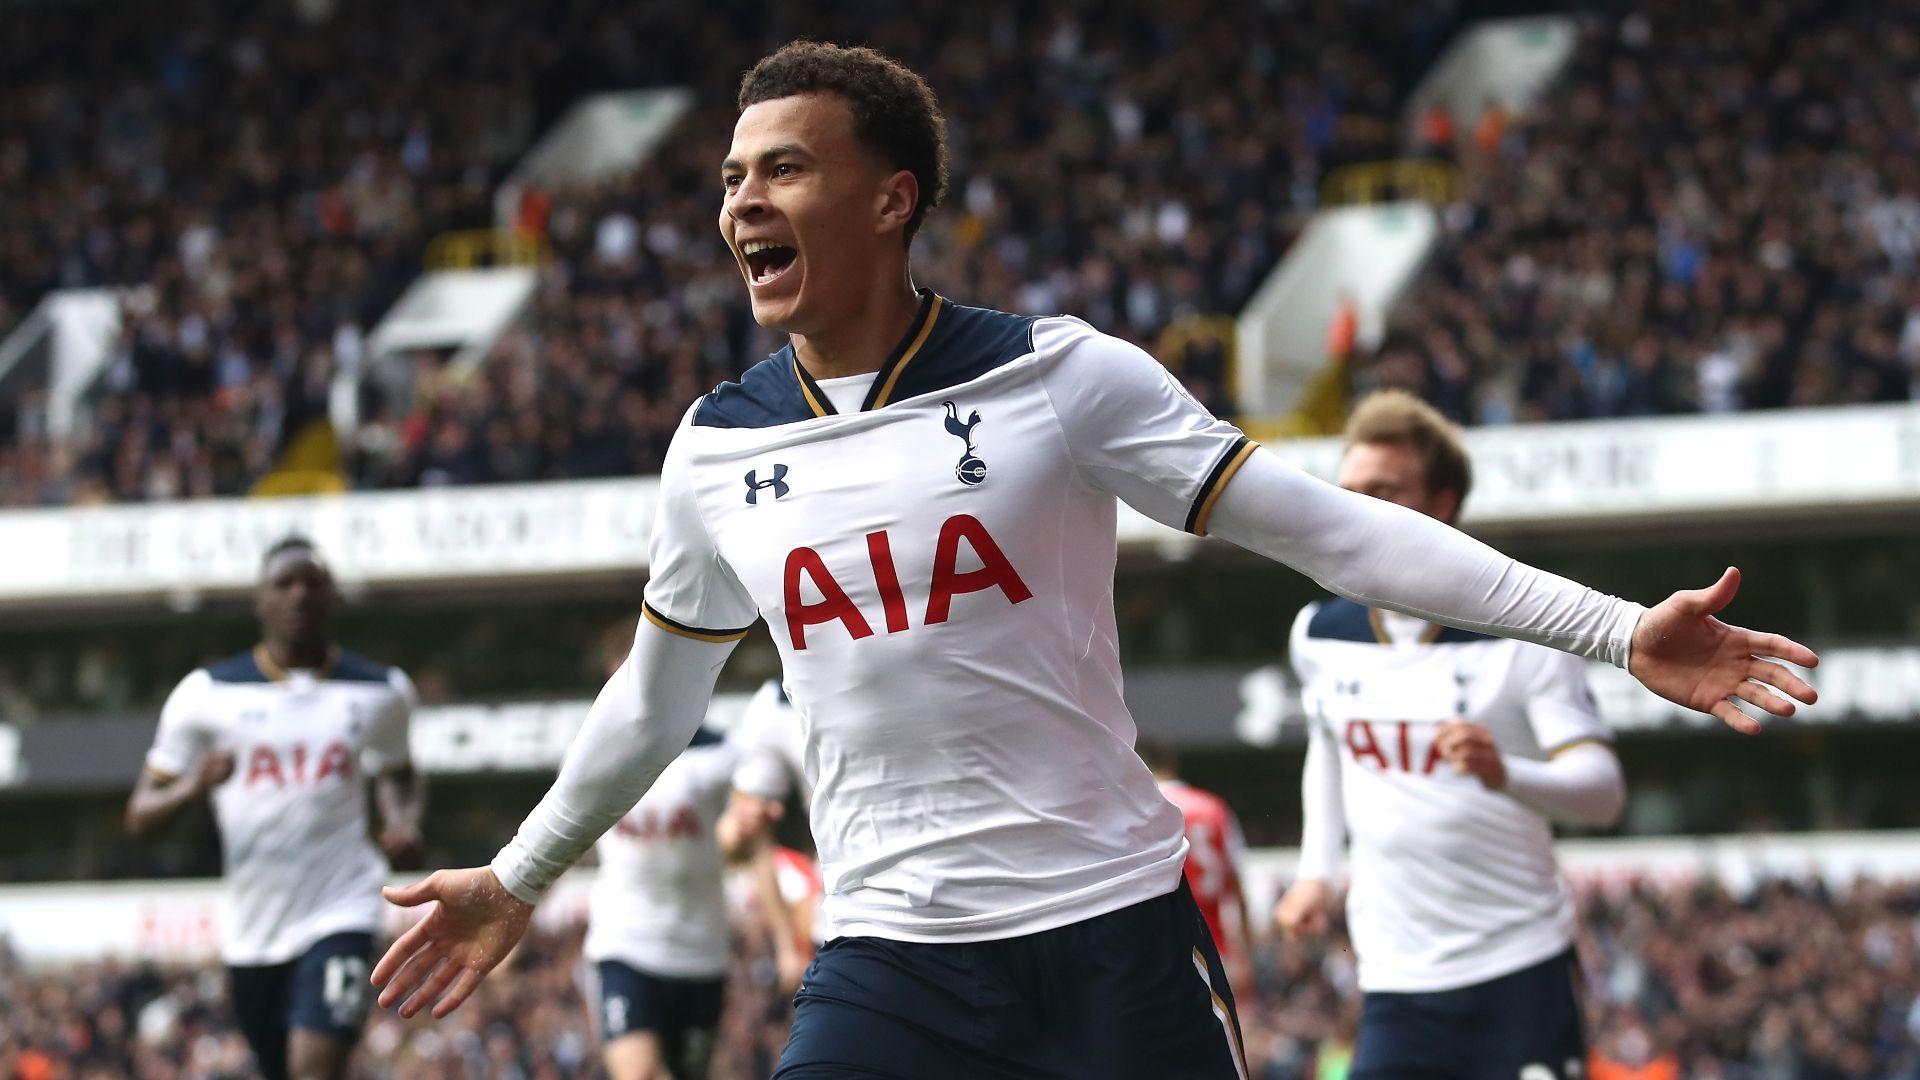 RUMOURS: Chelsea want to make statement & sign Dele Alli in excess